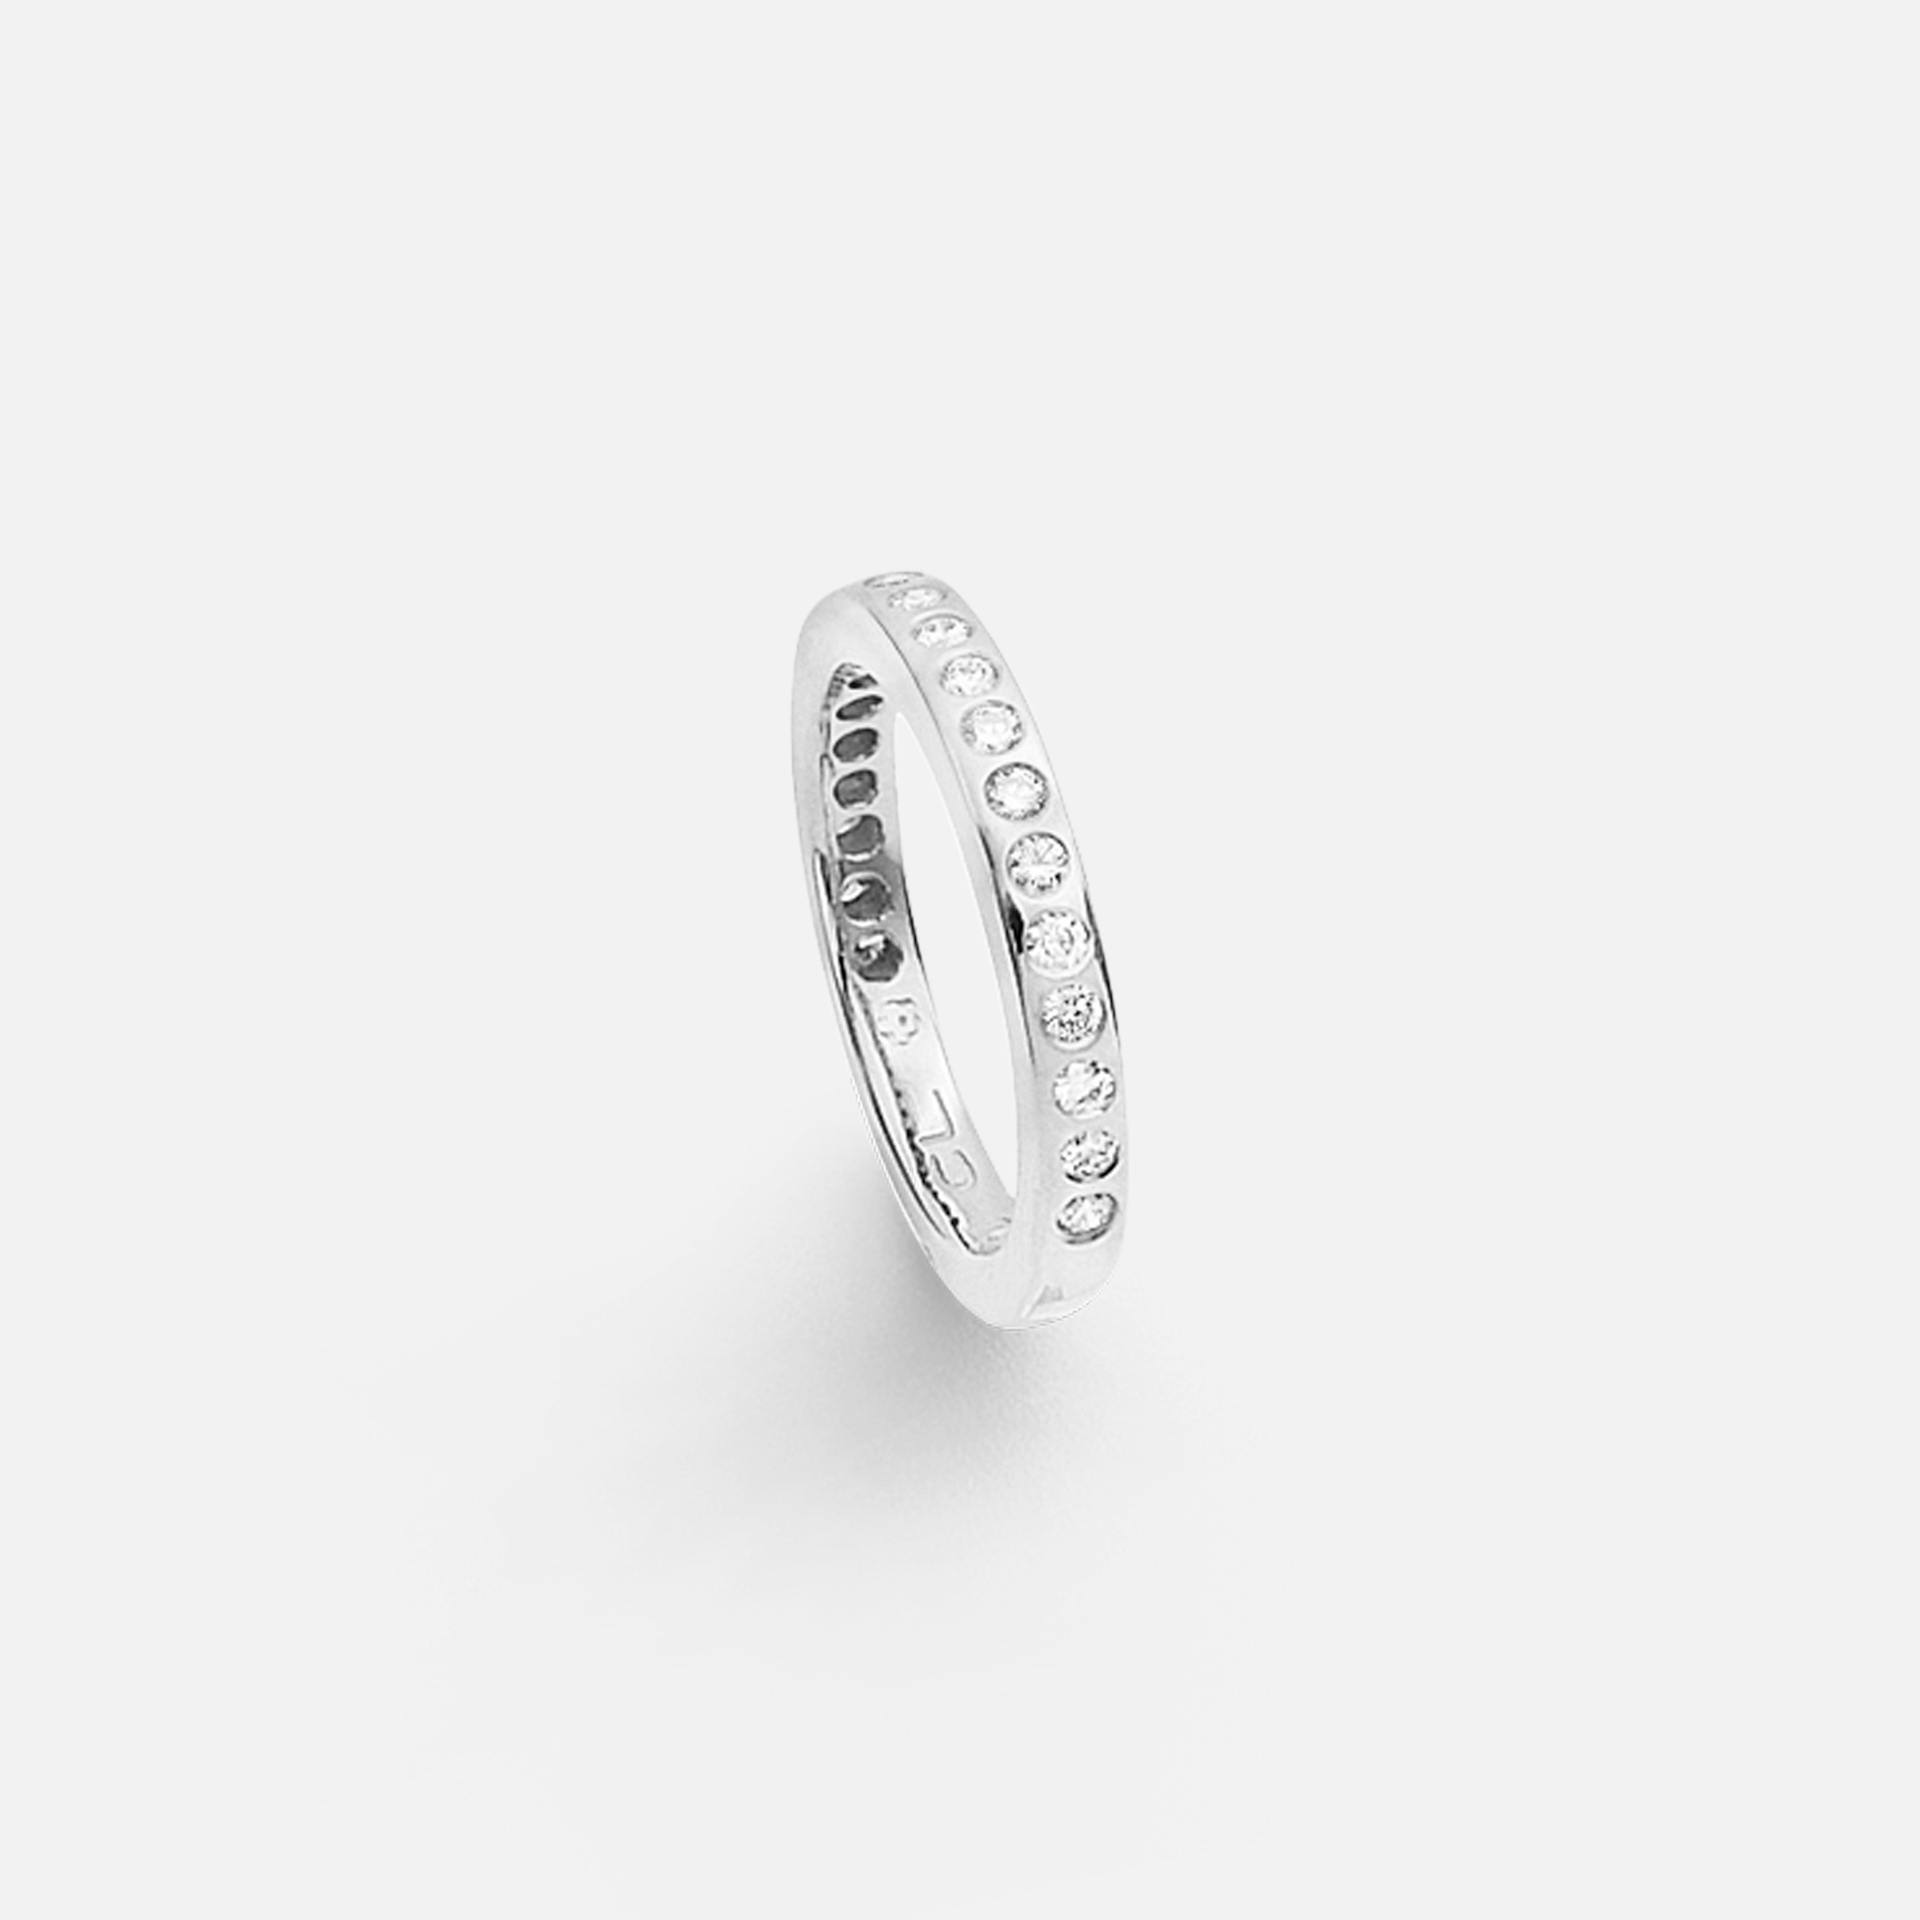 Forever Love ring 18k polished white gold with diamonds 0.38-0.46 ct. TW. VS.